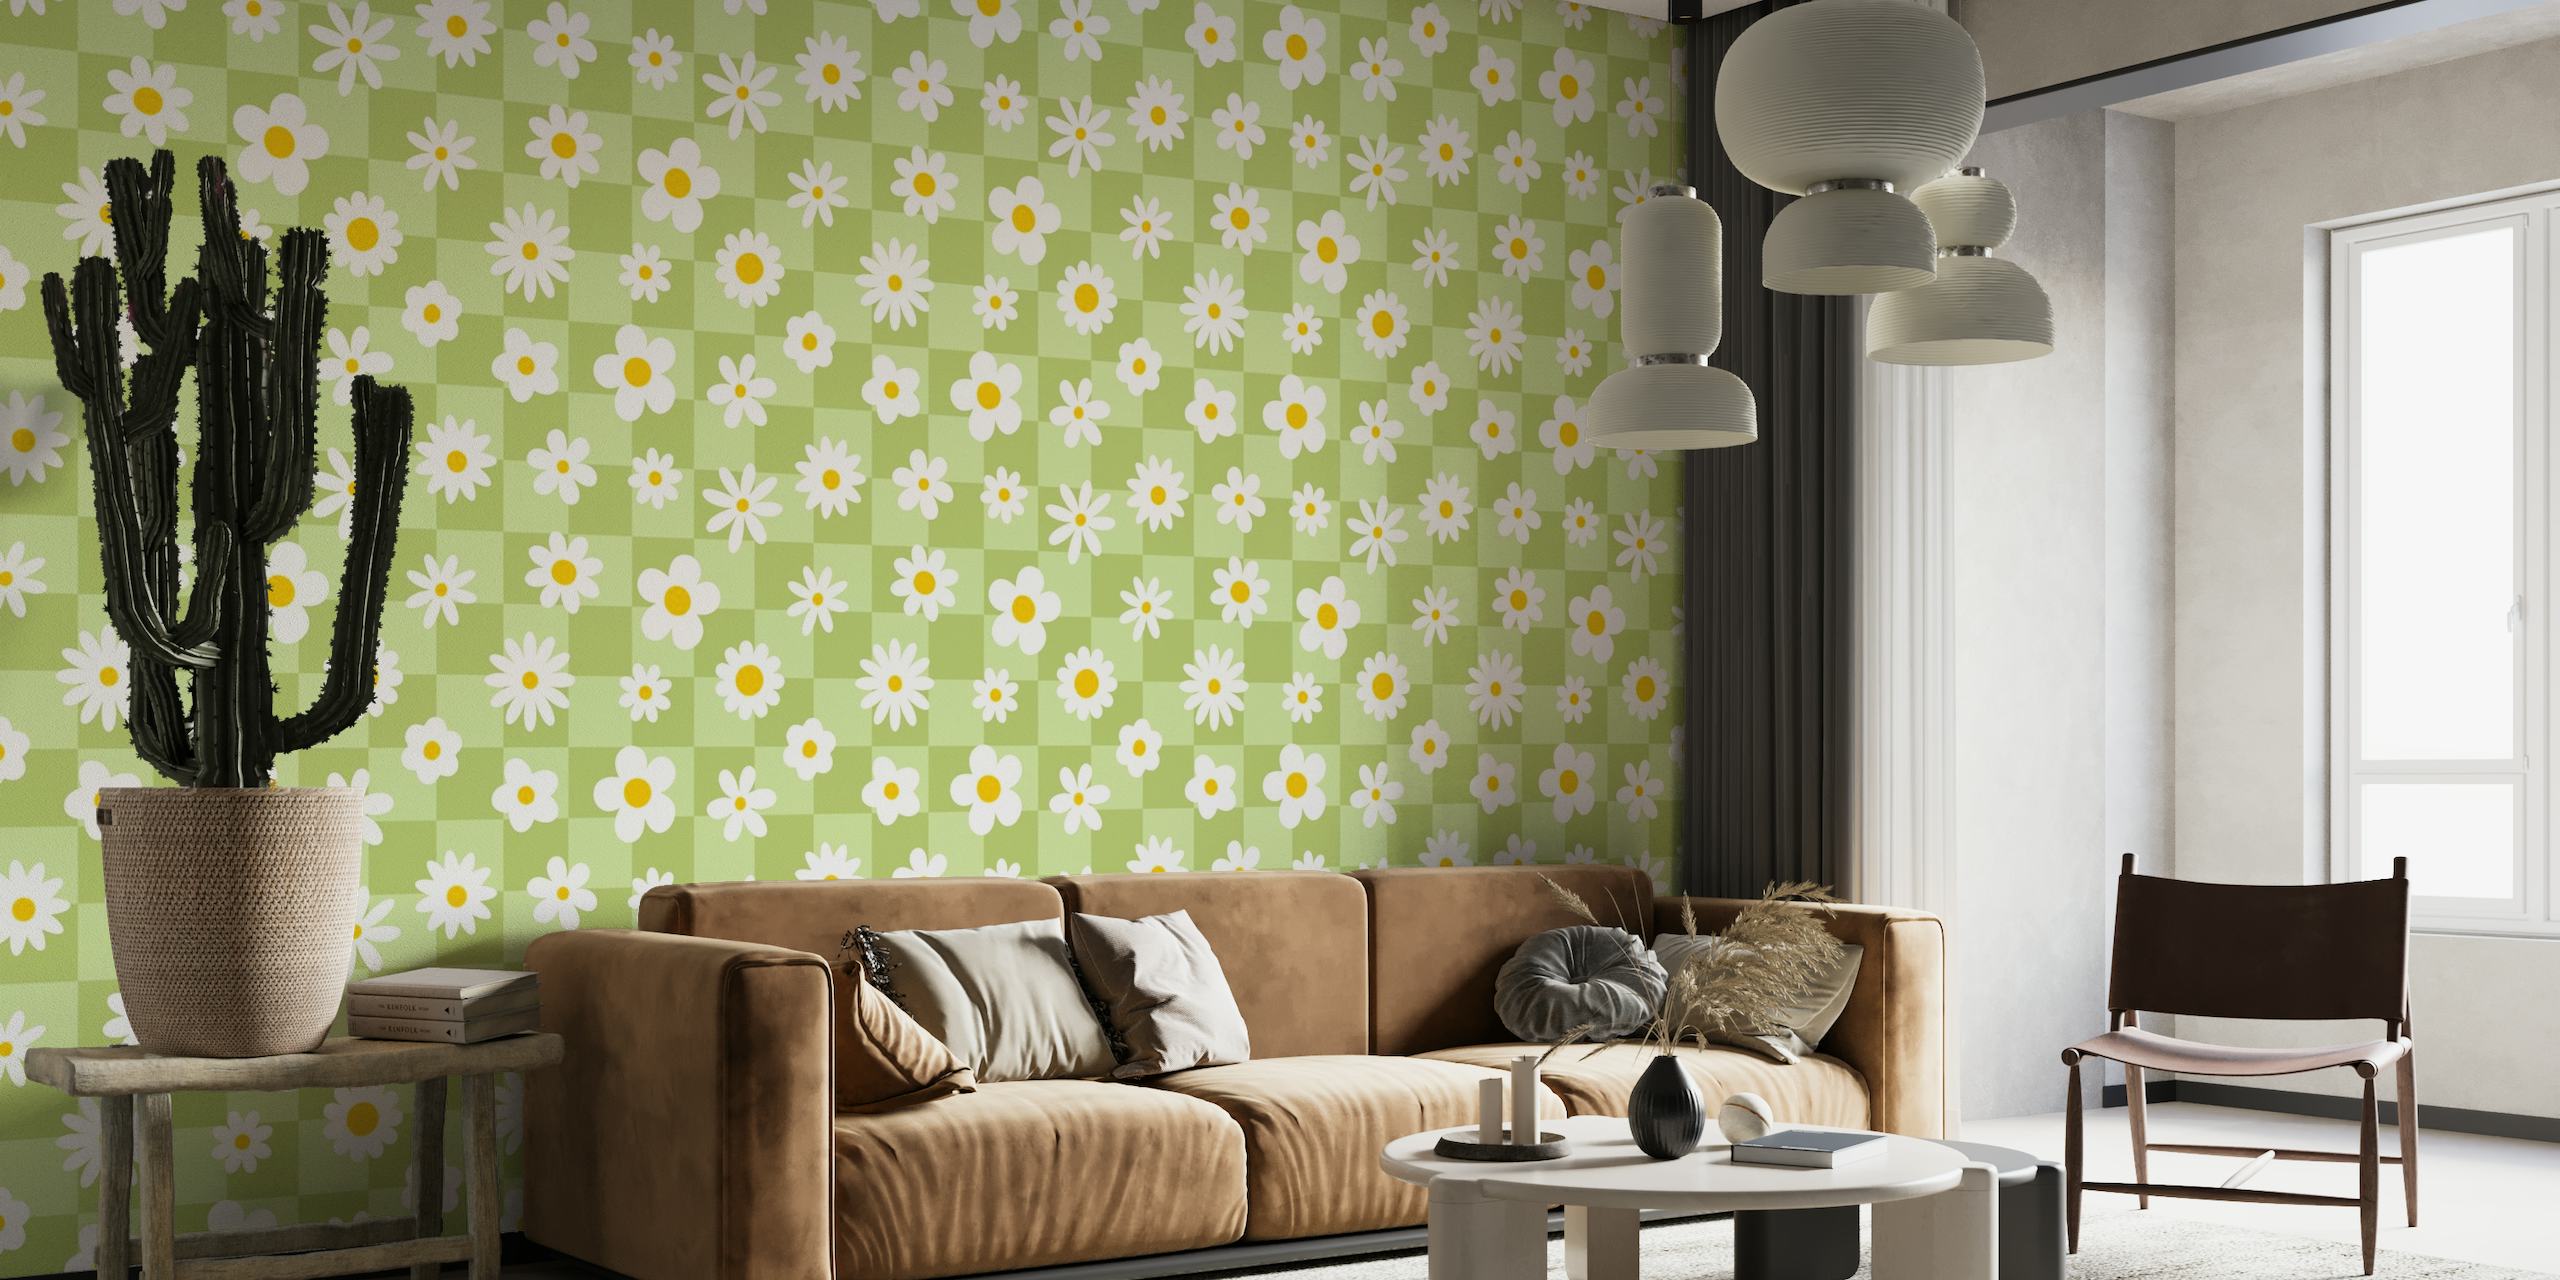 Whimsical white daisies with yellow centers on a green checkered background wall mural.